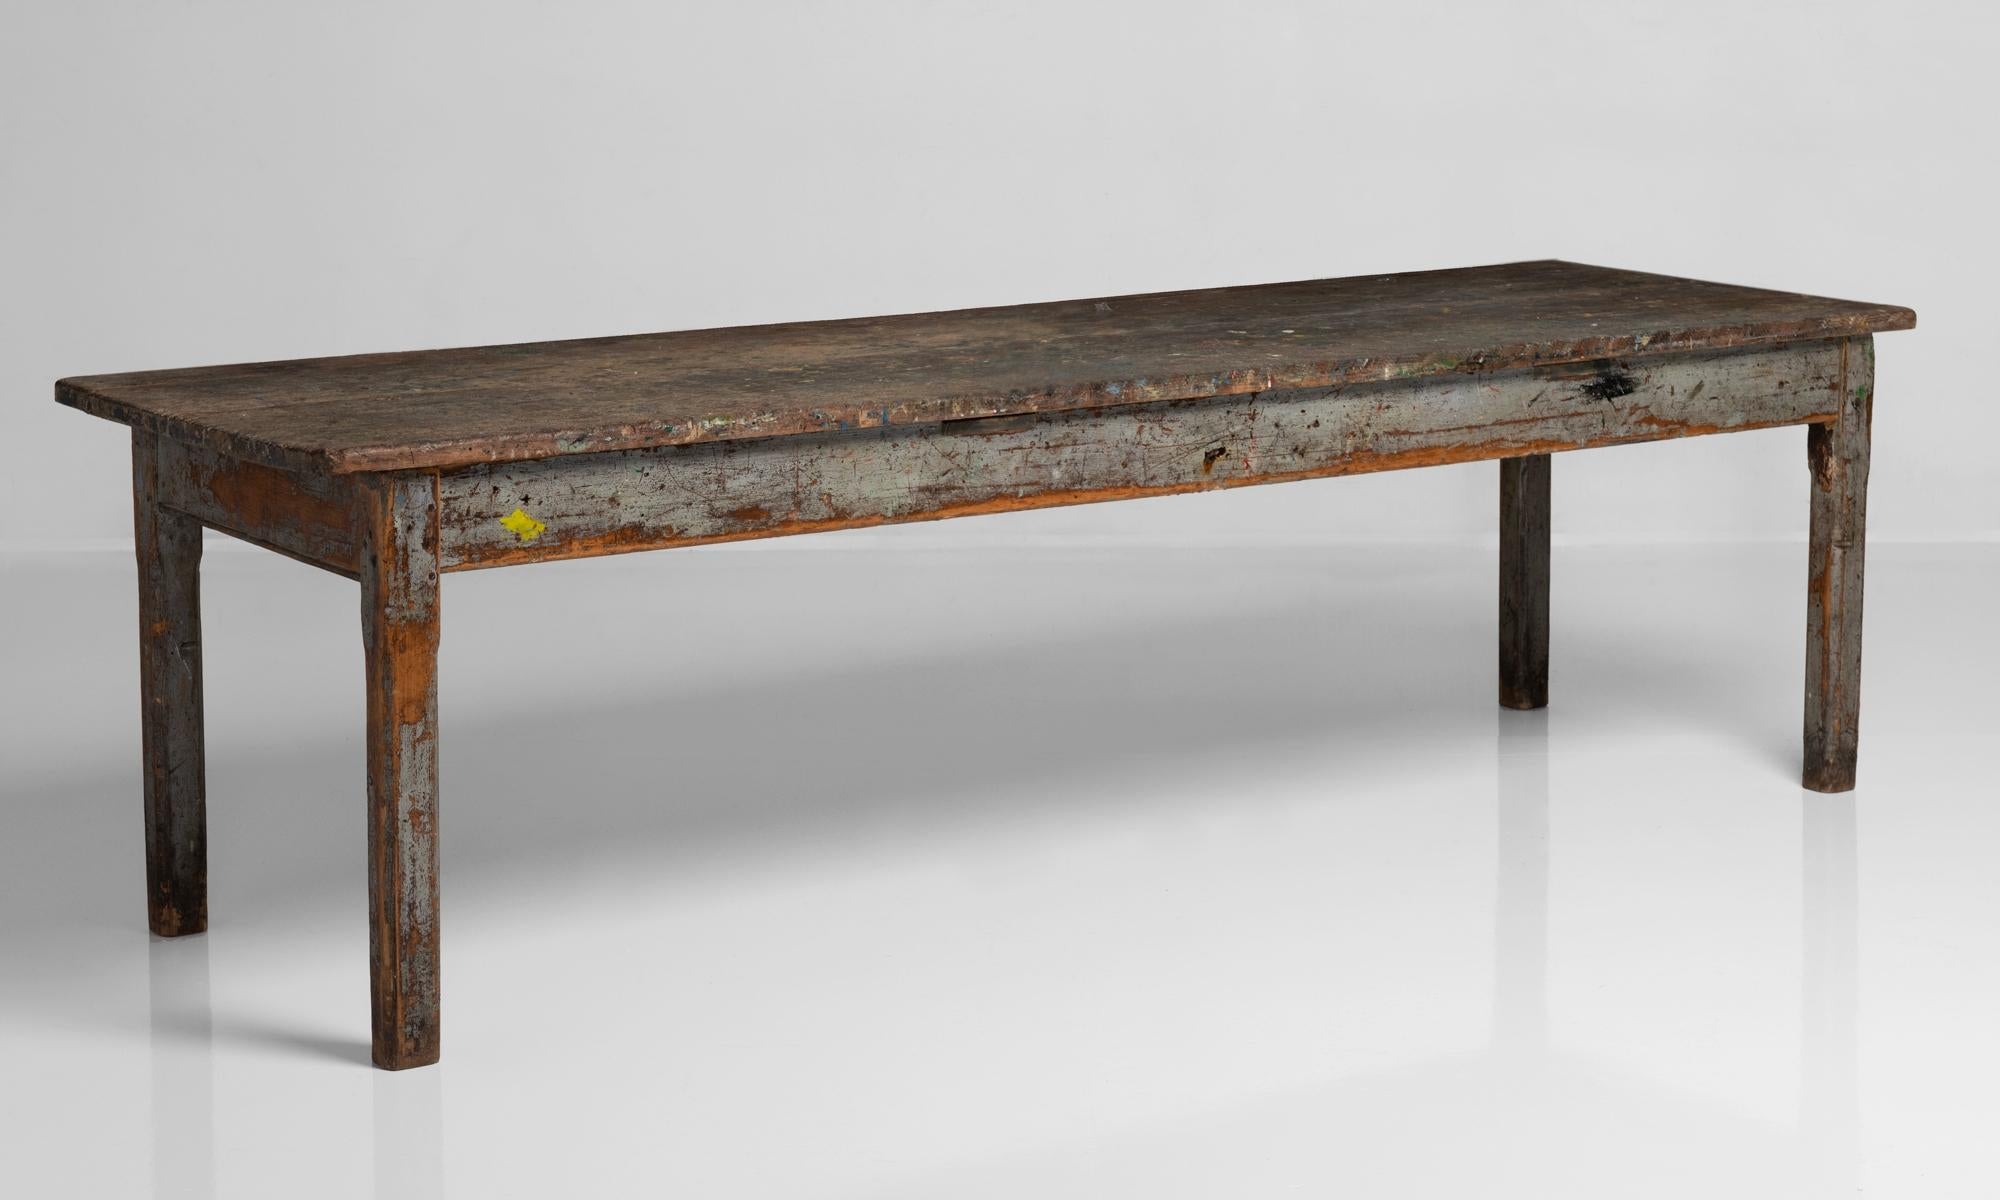 Artist's dining table, England, circa 1900.

Pine top and oak frame work table with original paint remnants and amazing patina.